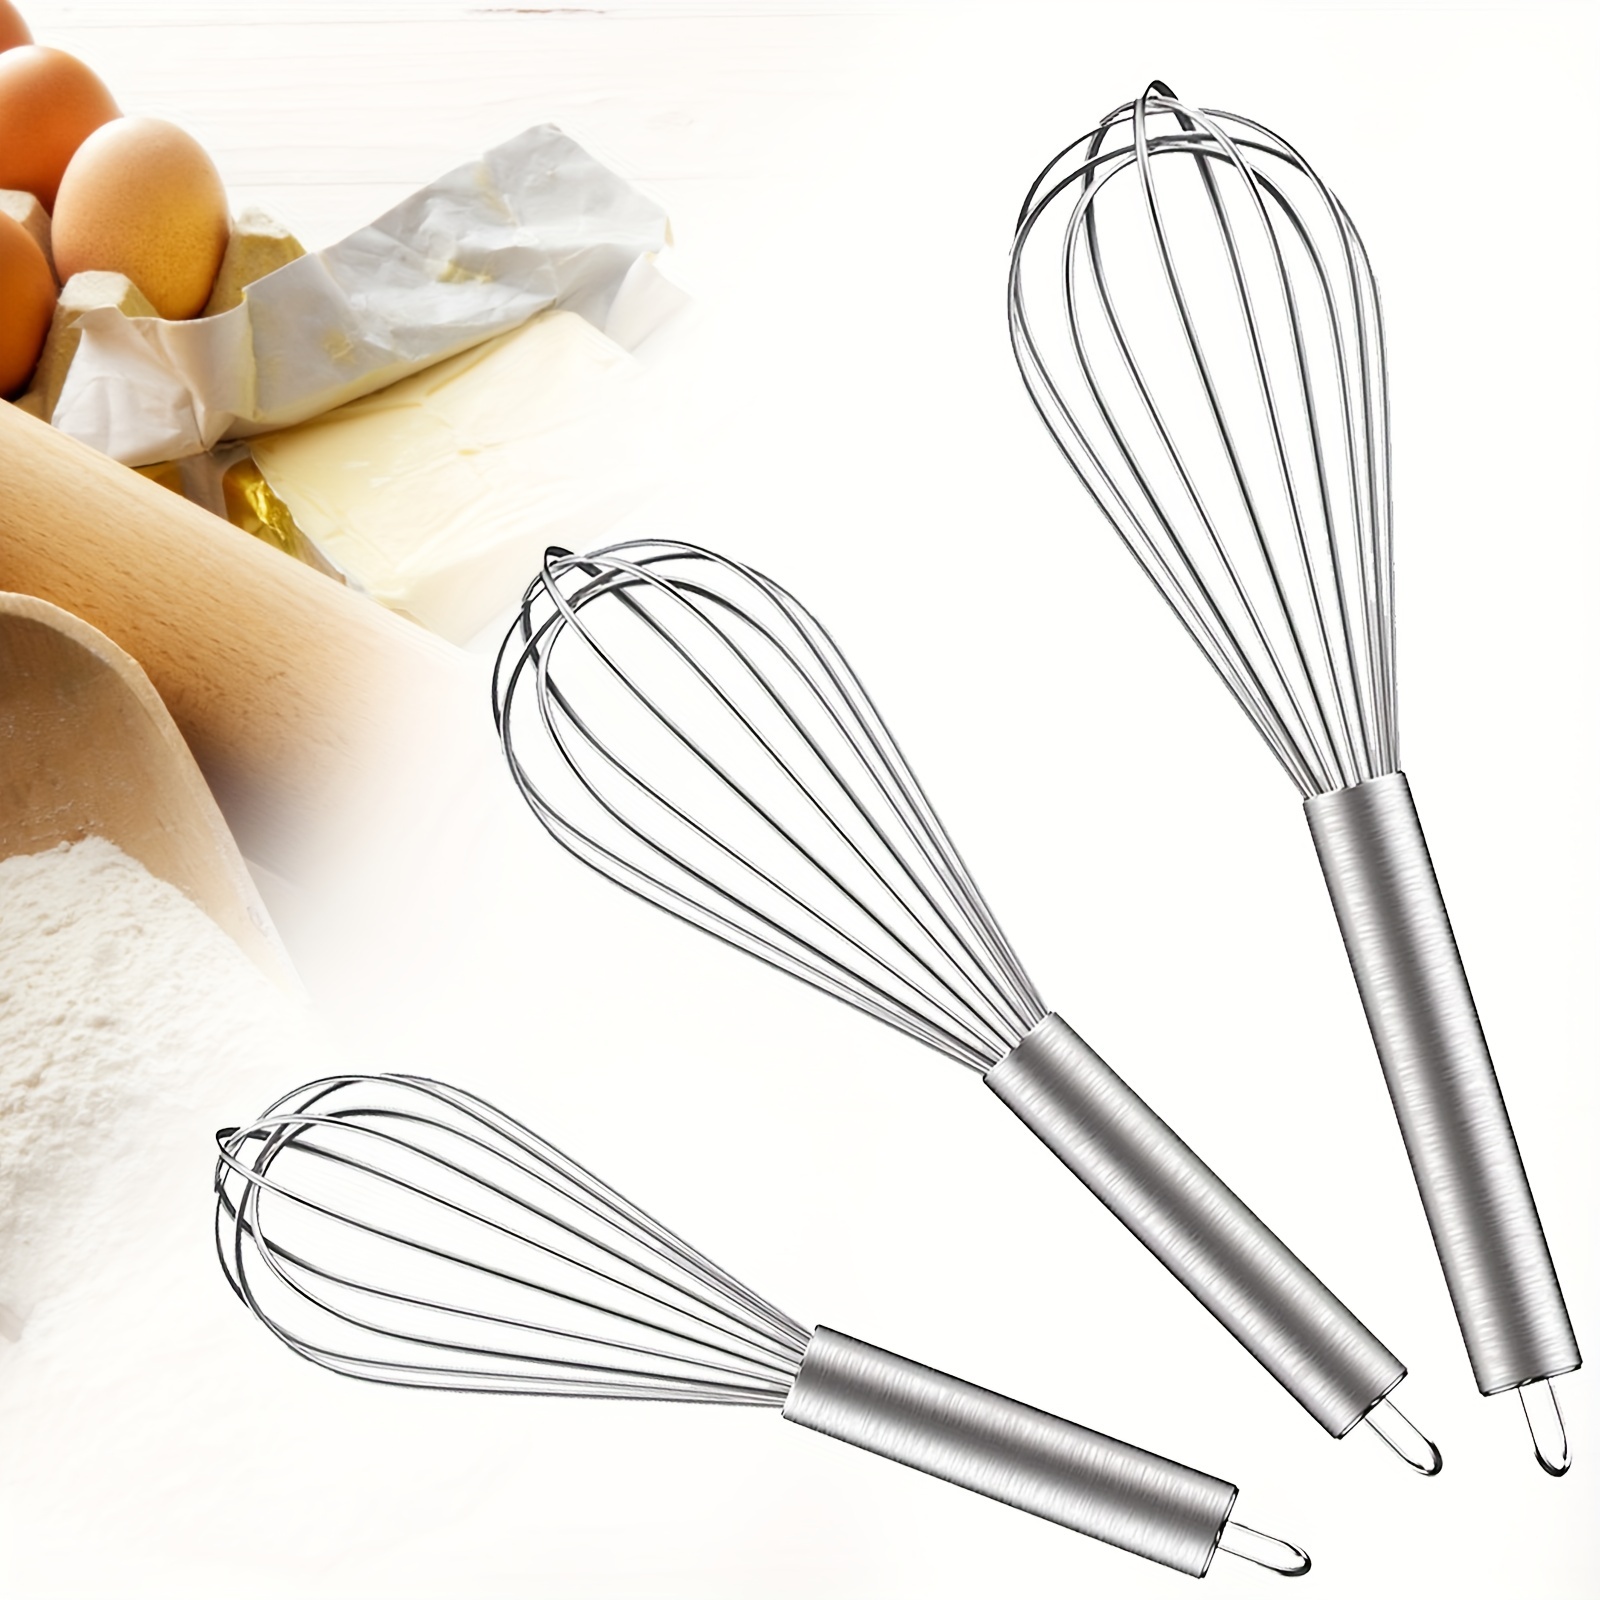  Whisks for Cooking, Stainless Steel Balloon Wire Whisk for  Blending, Whisking, Beating, Stirring, Kitchen Wisks 8 inch: Home & Kitchen